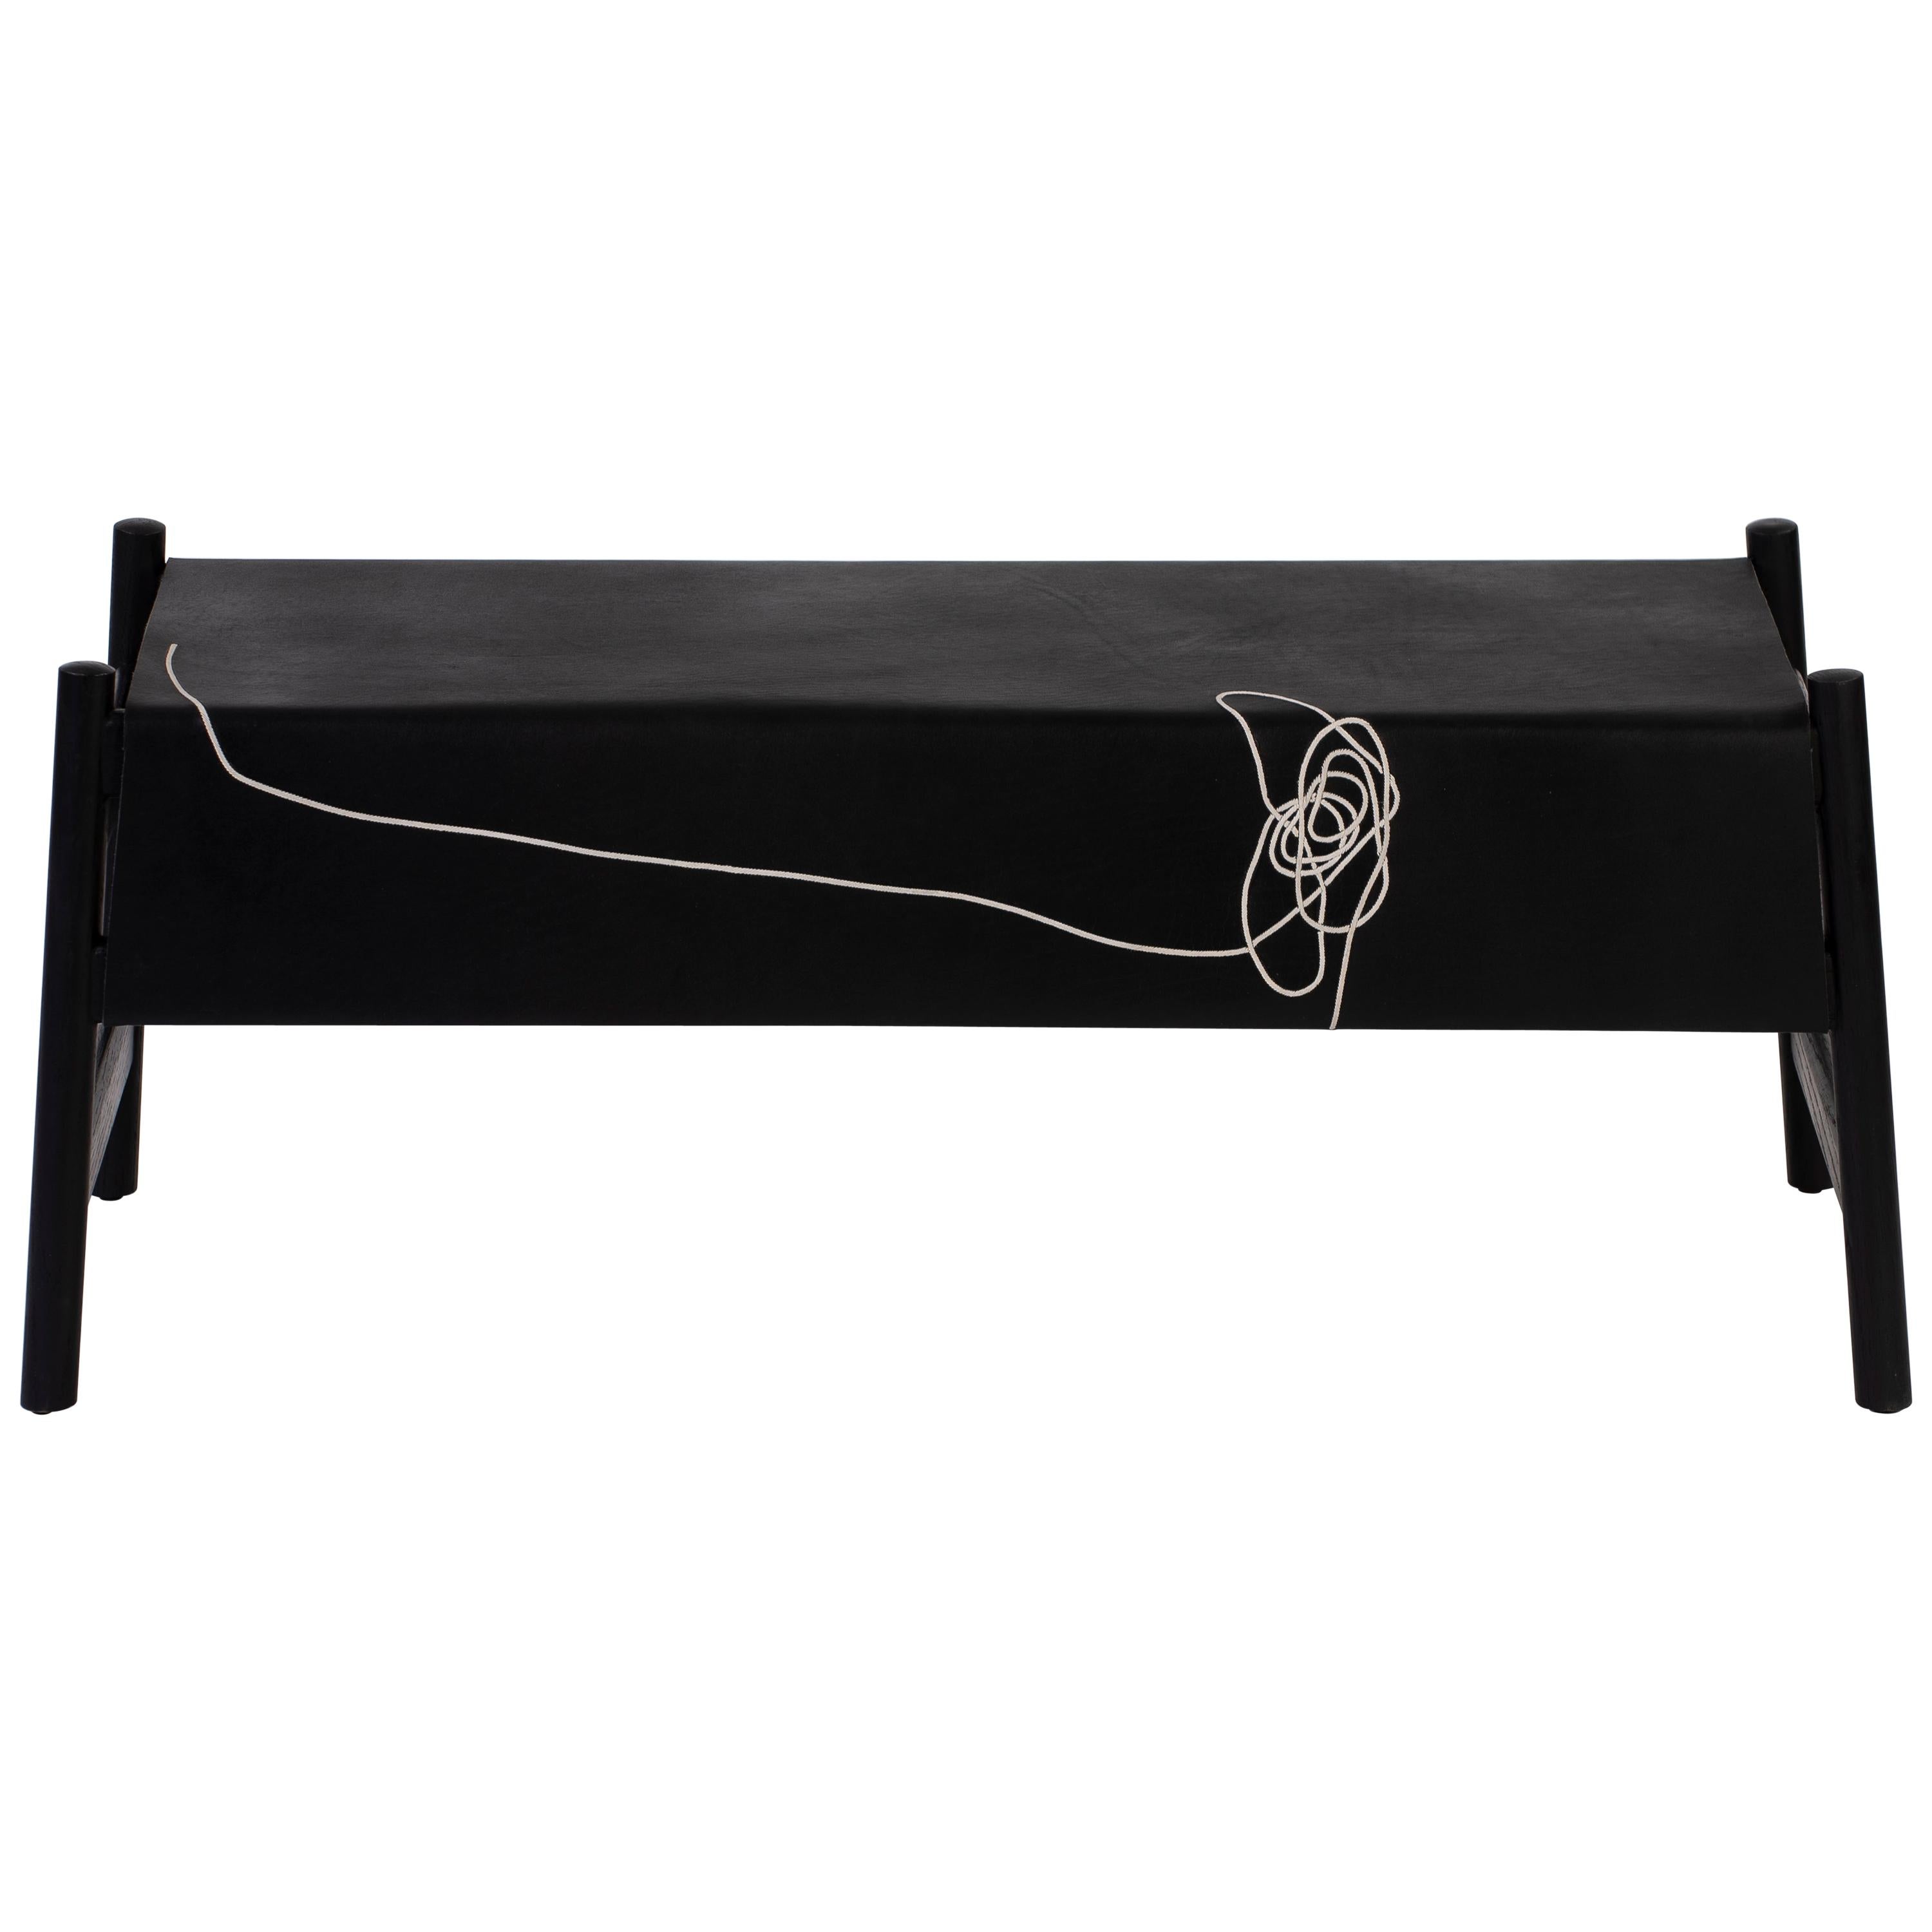 Trazo Black Cowhide Bench, Oak Wood and Maguey Fiber For Sale